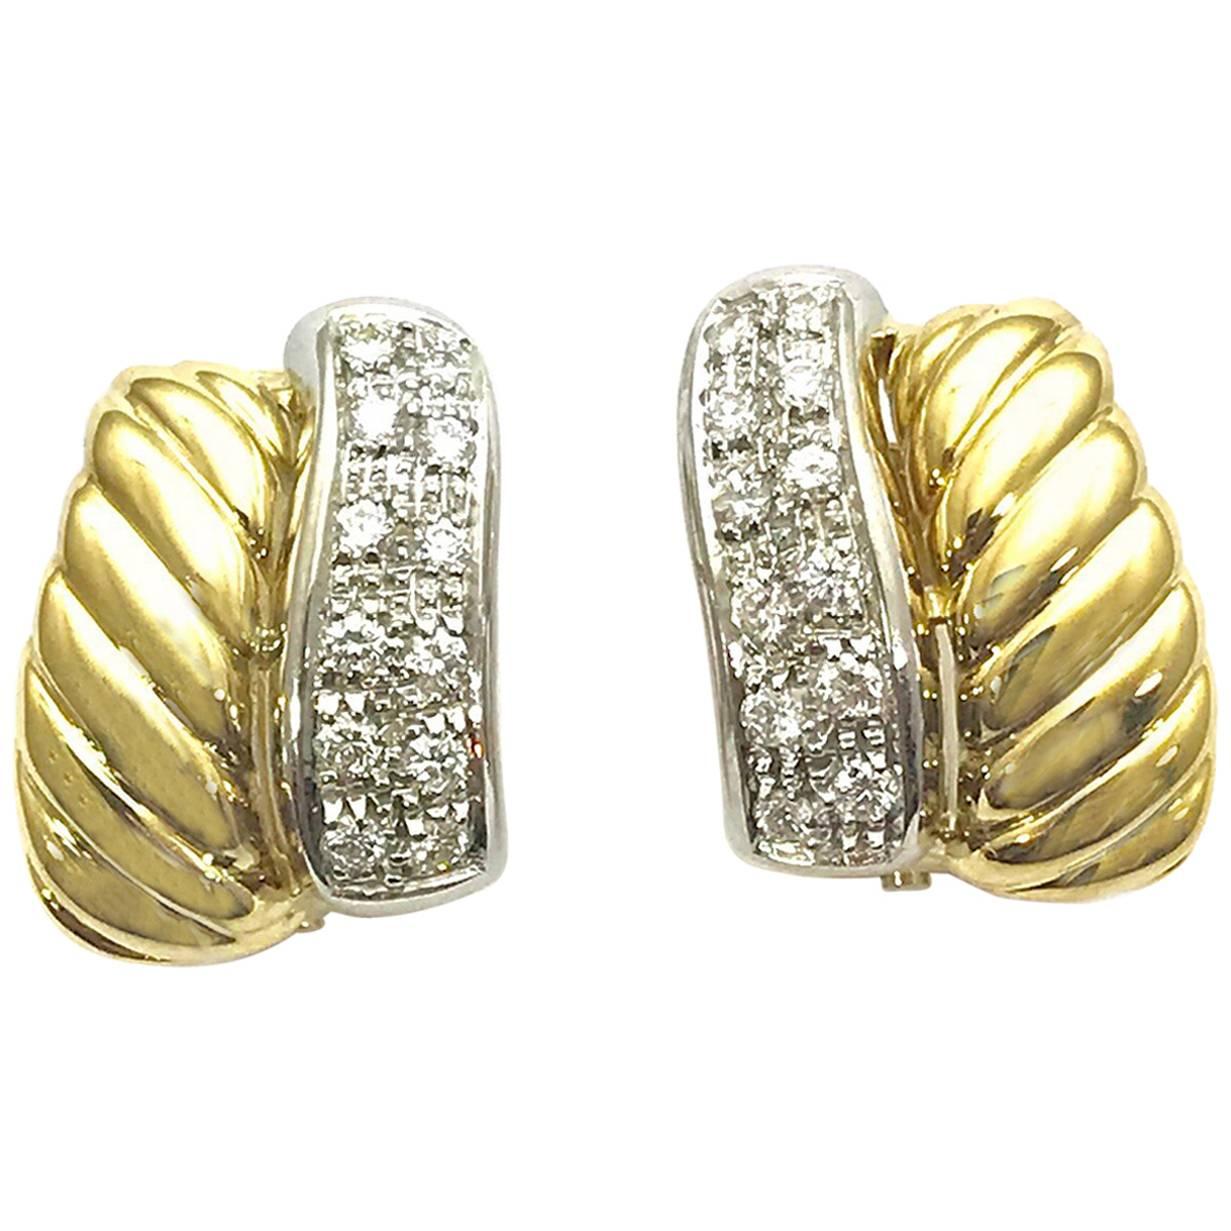 Diamond and Two-Tone Gold Clip and Post Earrings